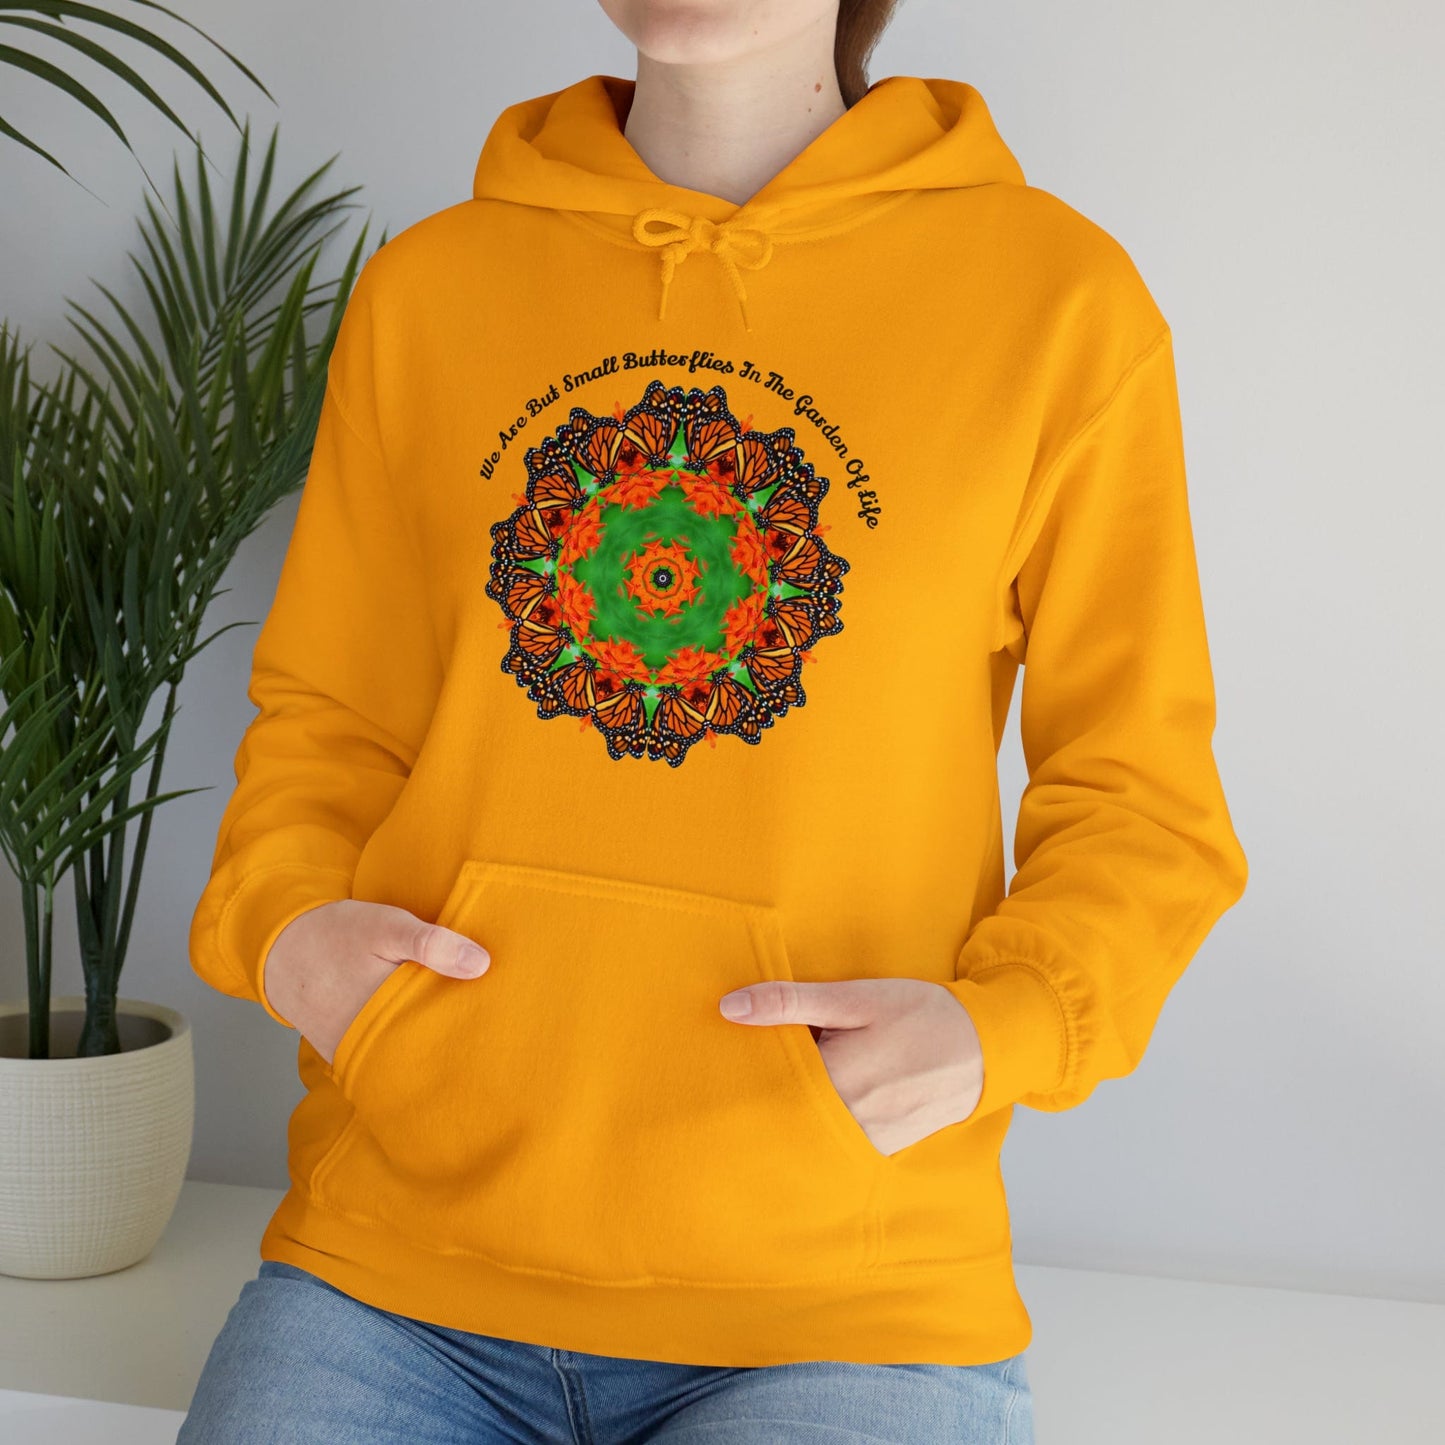 Pretty & Cute Butterfly Motivational Graphic Hoodie Sweatshirt Monarch Butterfly Mandala Art We Are But Small Butterflies In The Garden Of Life gold